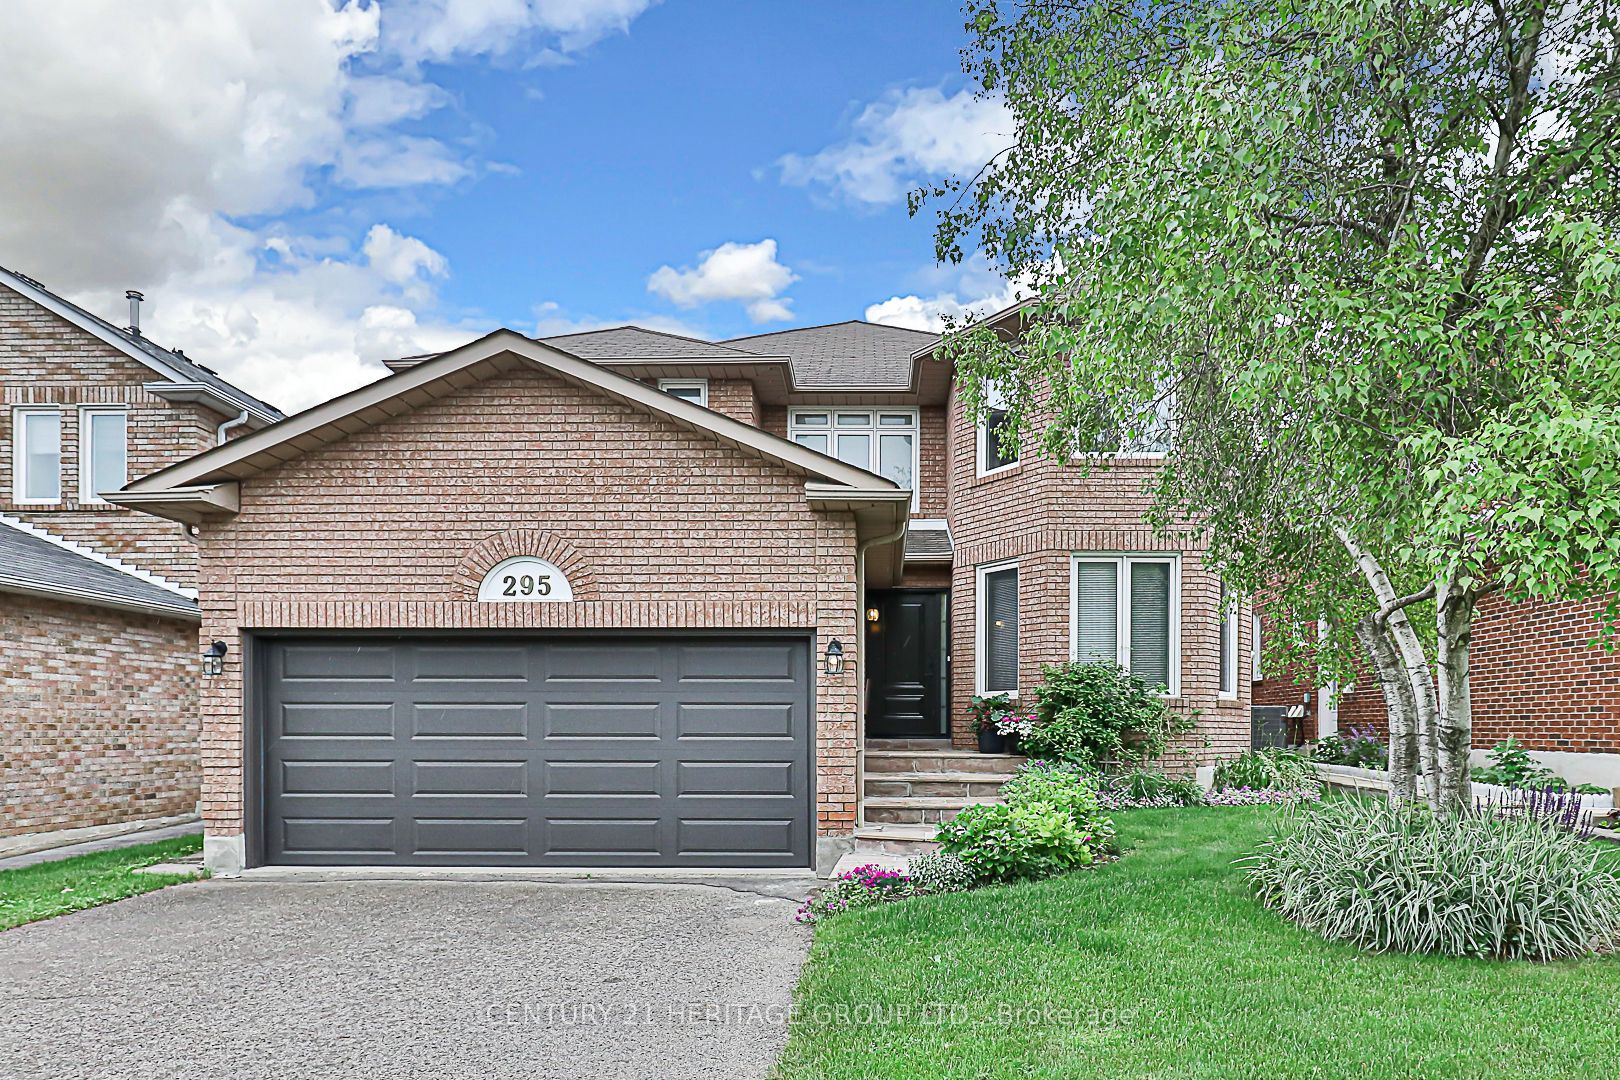 Detached house for sale at 295 Weldrick Rd Richmond Hill Ontario